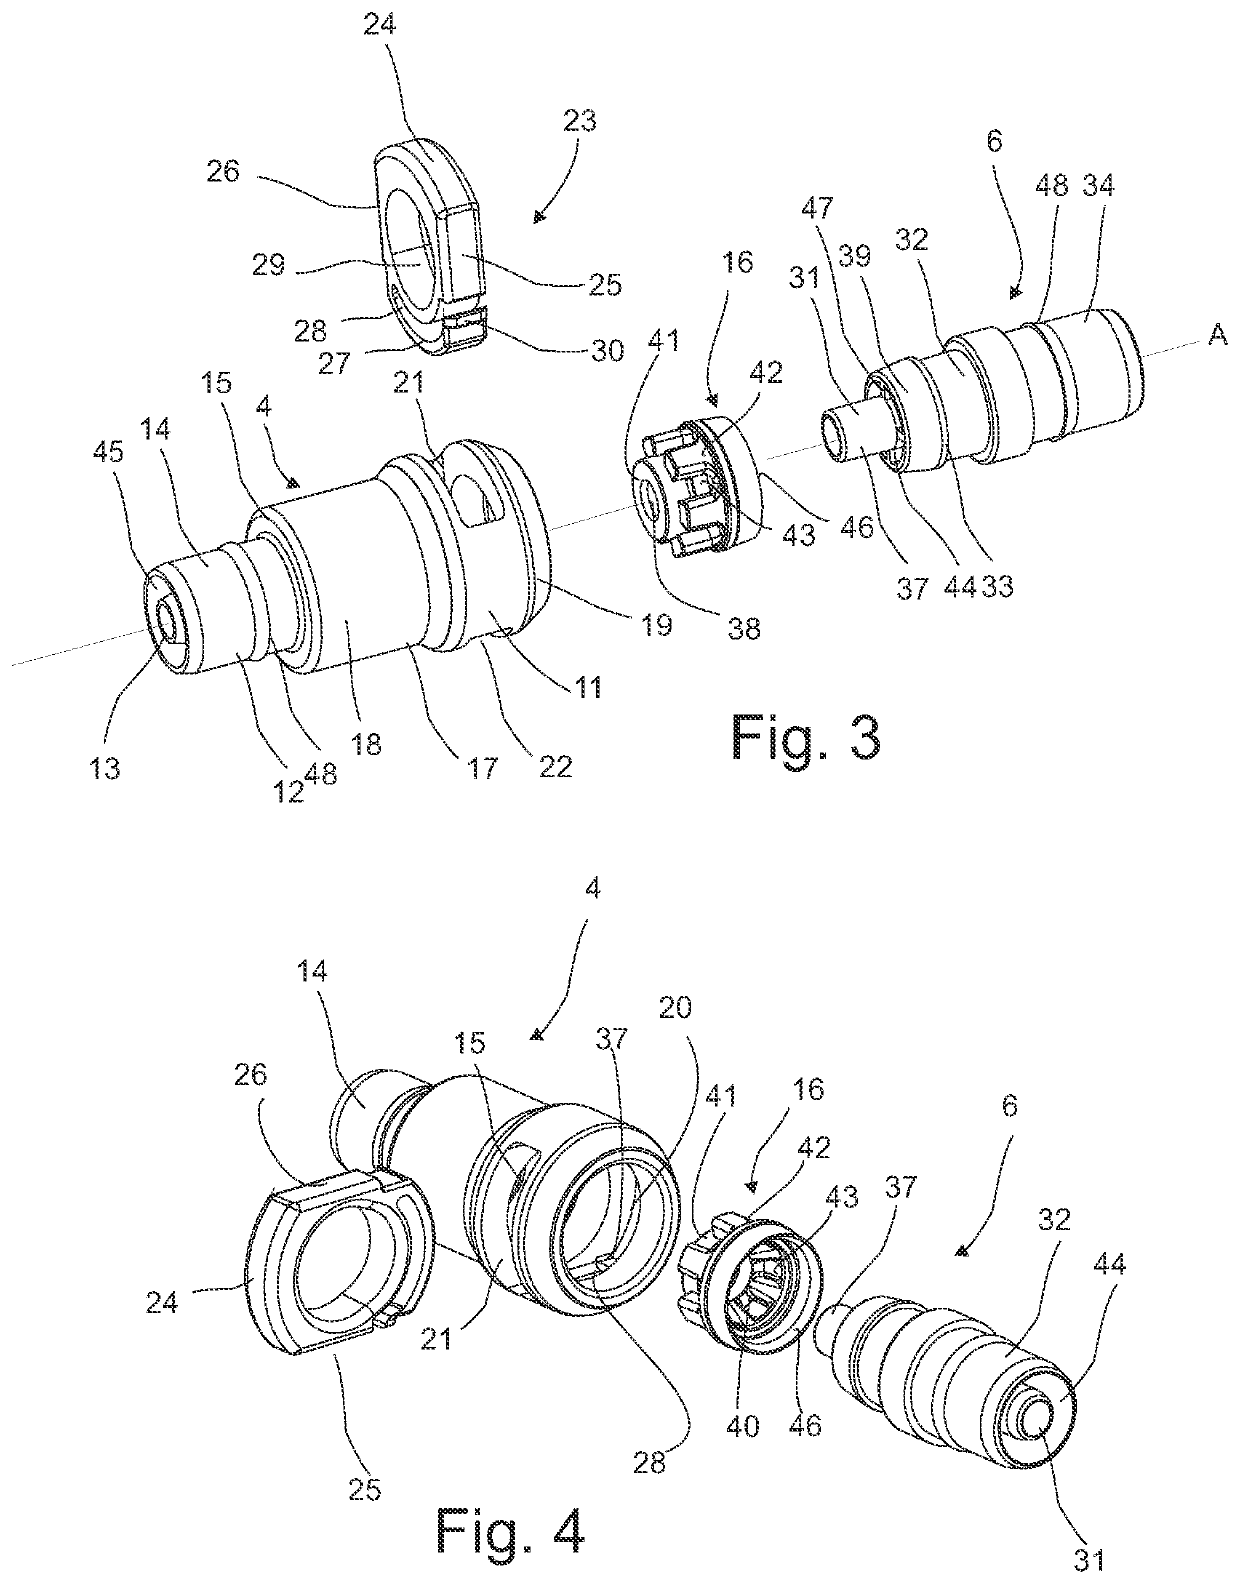 Flexible double lumen tube and a tube coupling system for same